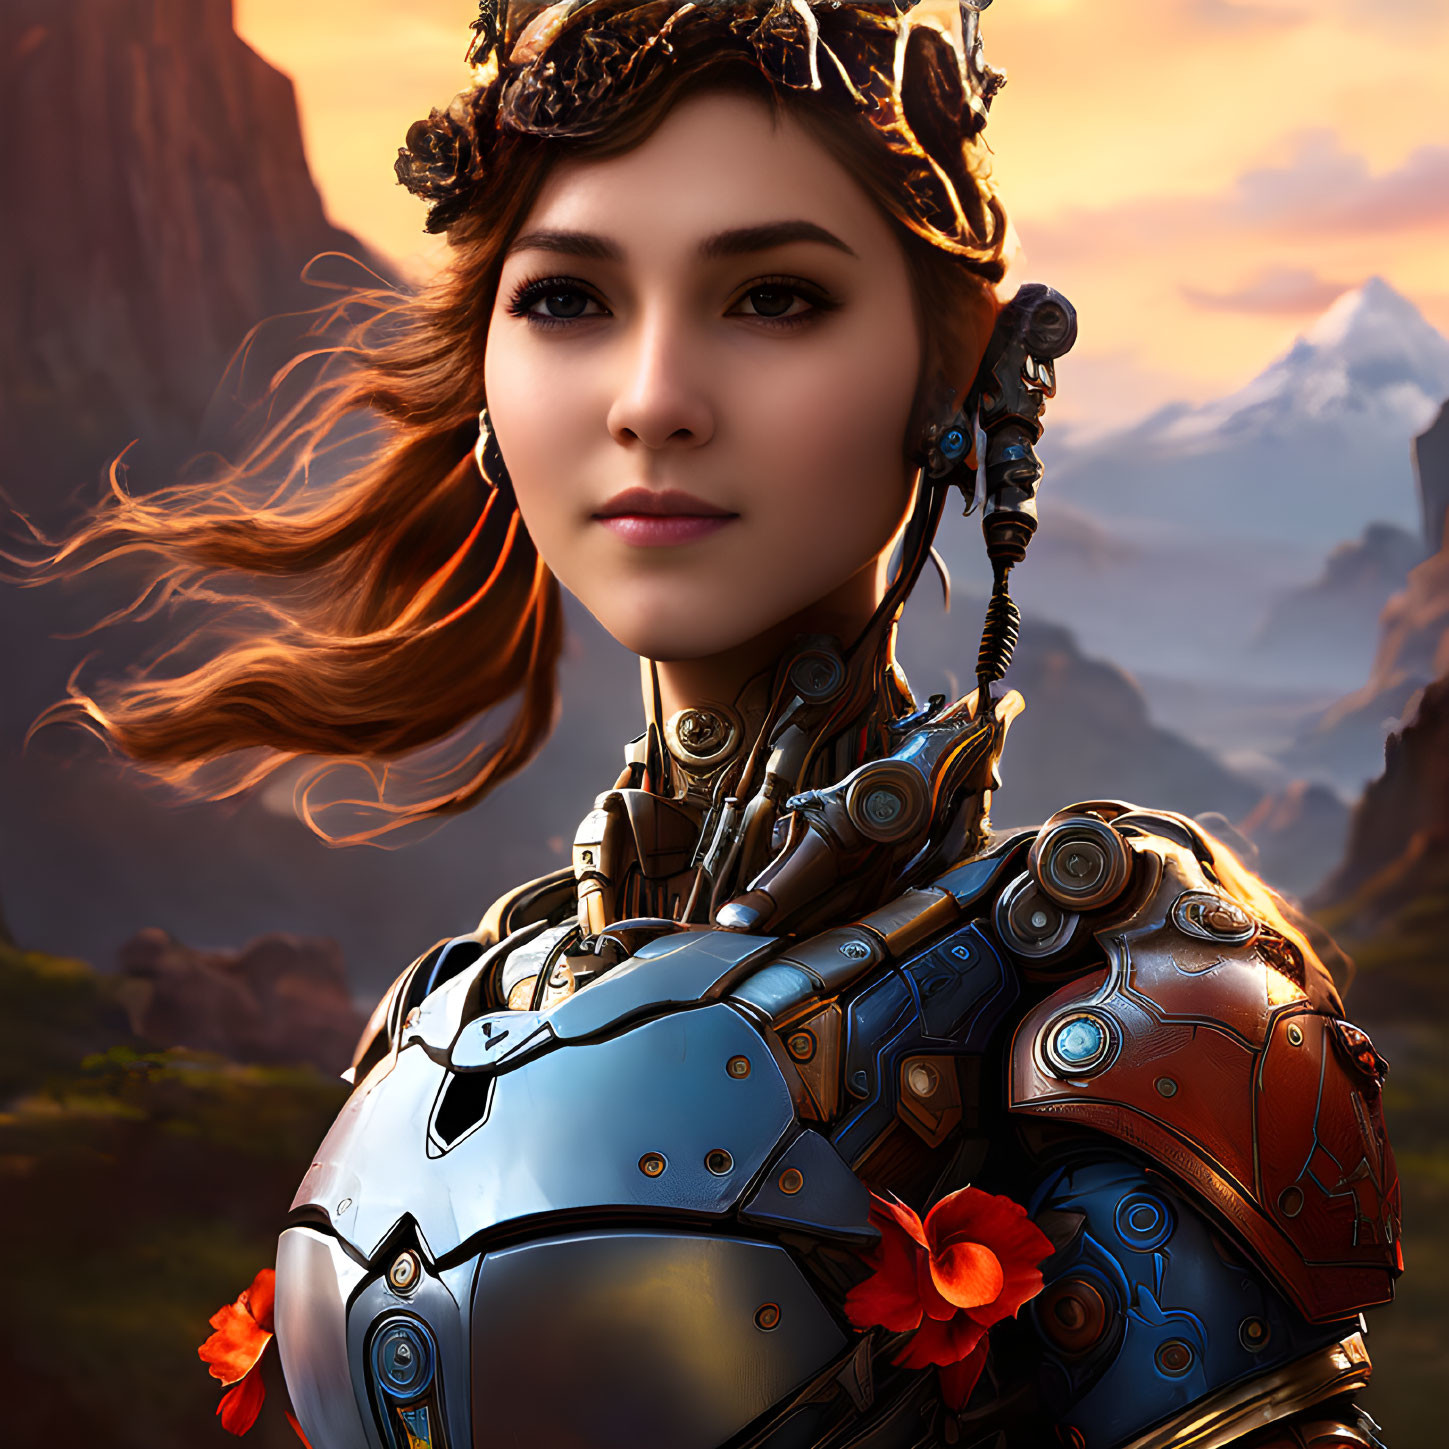 Digital artwork: Woman with robotic body, crown, flowing hair, against mountain backdrop